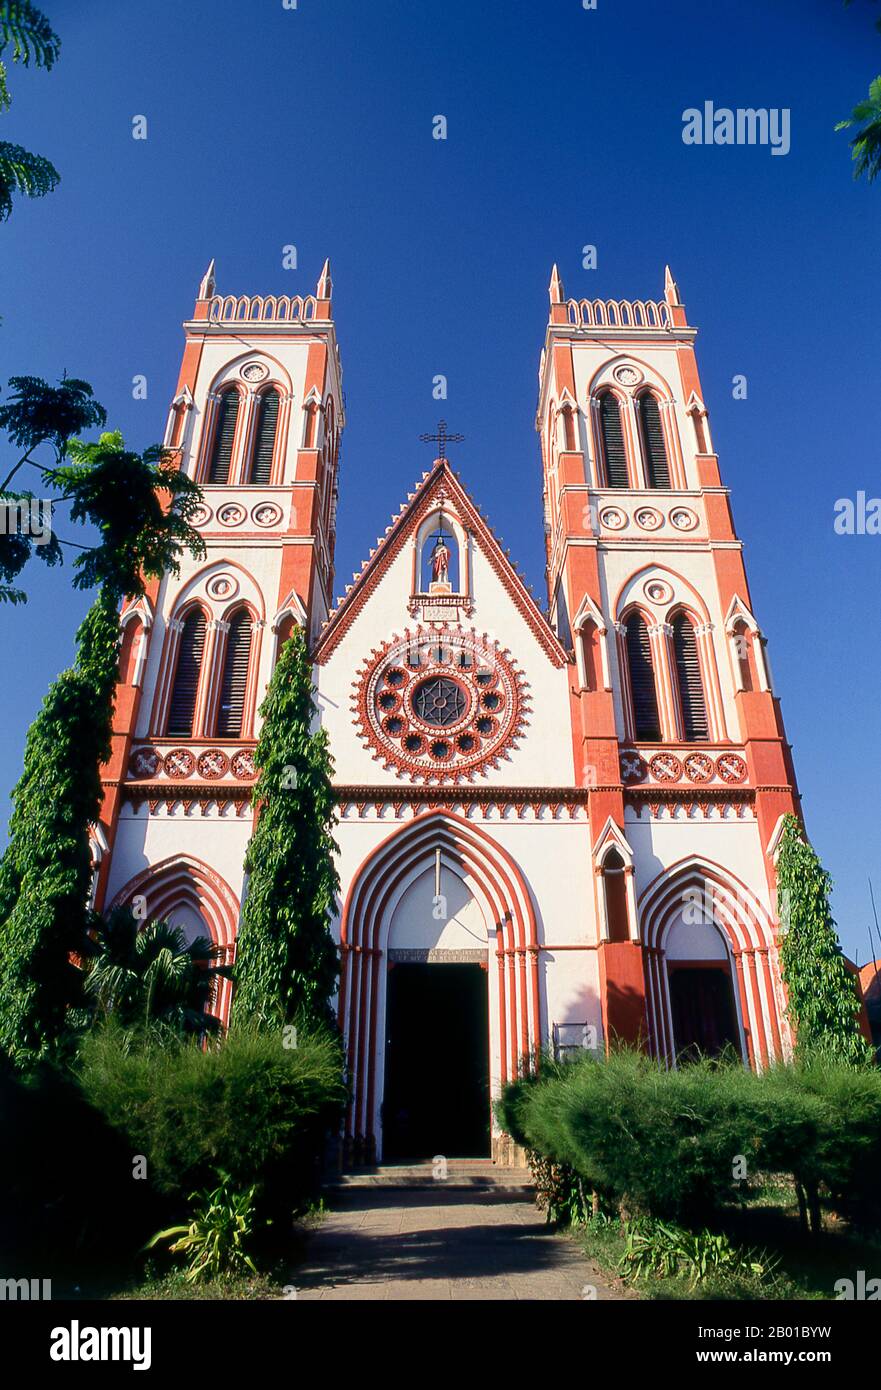 India: The Church of the Sacred Heart of Jesus, Pondicherry.  Pondicherry was the capital of the former French territories in India. Besides Pondi itself – acquired from a local ruler in 1674 – these included Chandernagore in Bengal (1690); Mahé in Kerala (1725); Yanam in Andhra Pradesh (1731); and Karaikal in Tamil Nadu (1739). Chandernagore was returned to India three years after independence, in 1951, and was absorbed into West Bengal. Returned to India in 1956, the remaining four territories were constituted as the Union Territory of Pondicherry in 1962. Stock Photo